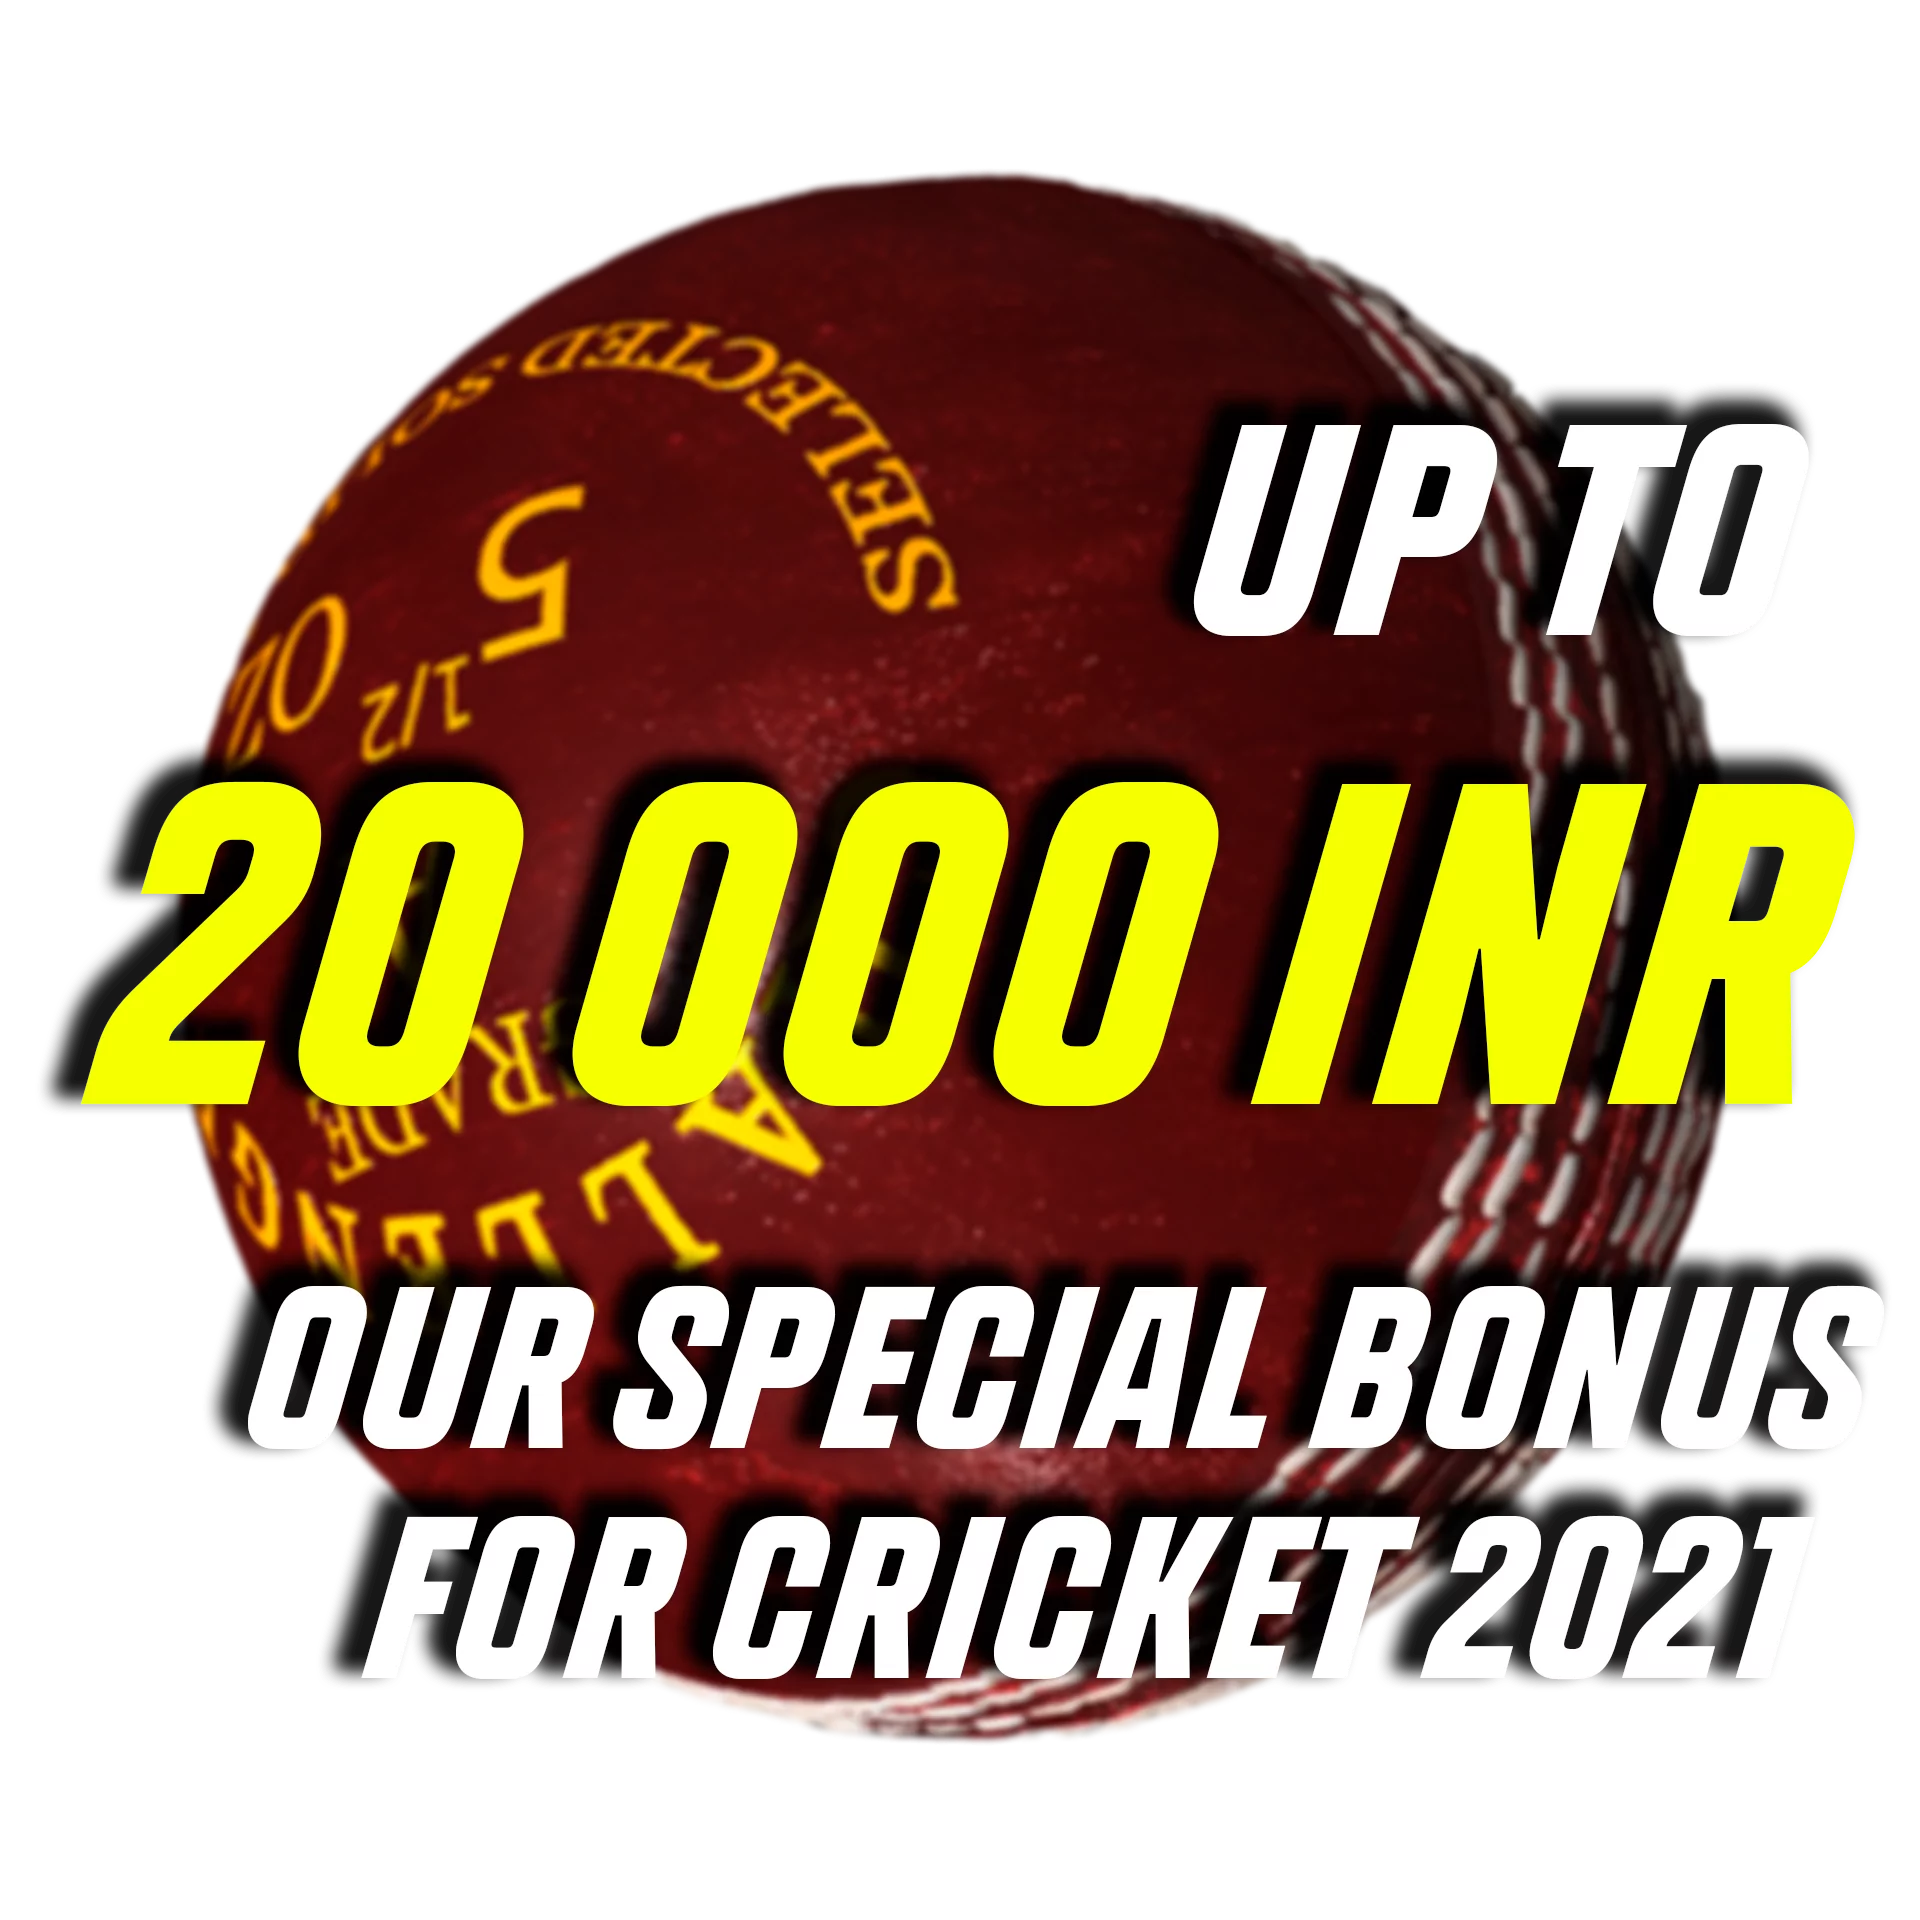 Receive your Parimatch bonus and place bets on cricket with a great advantage.